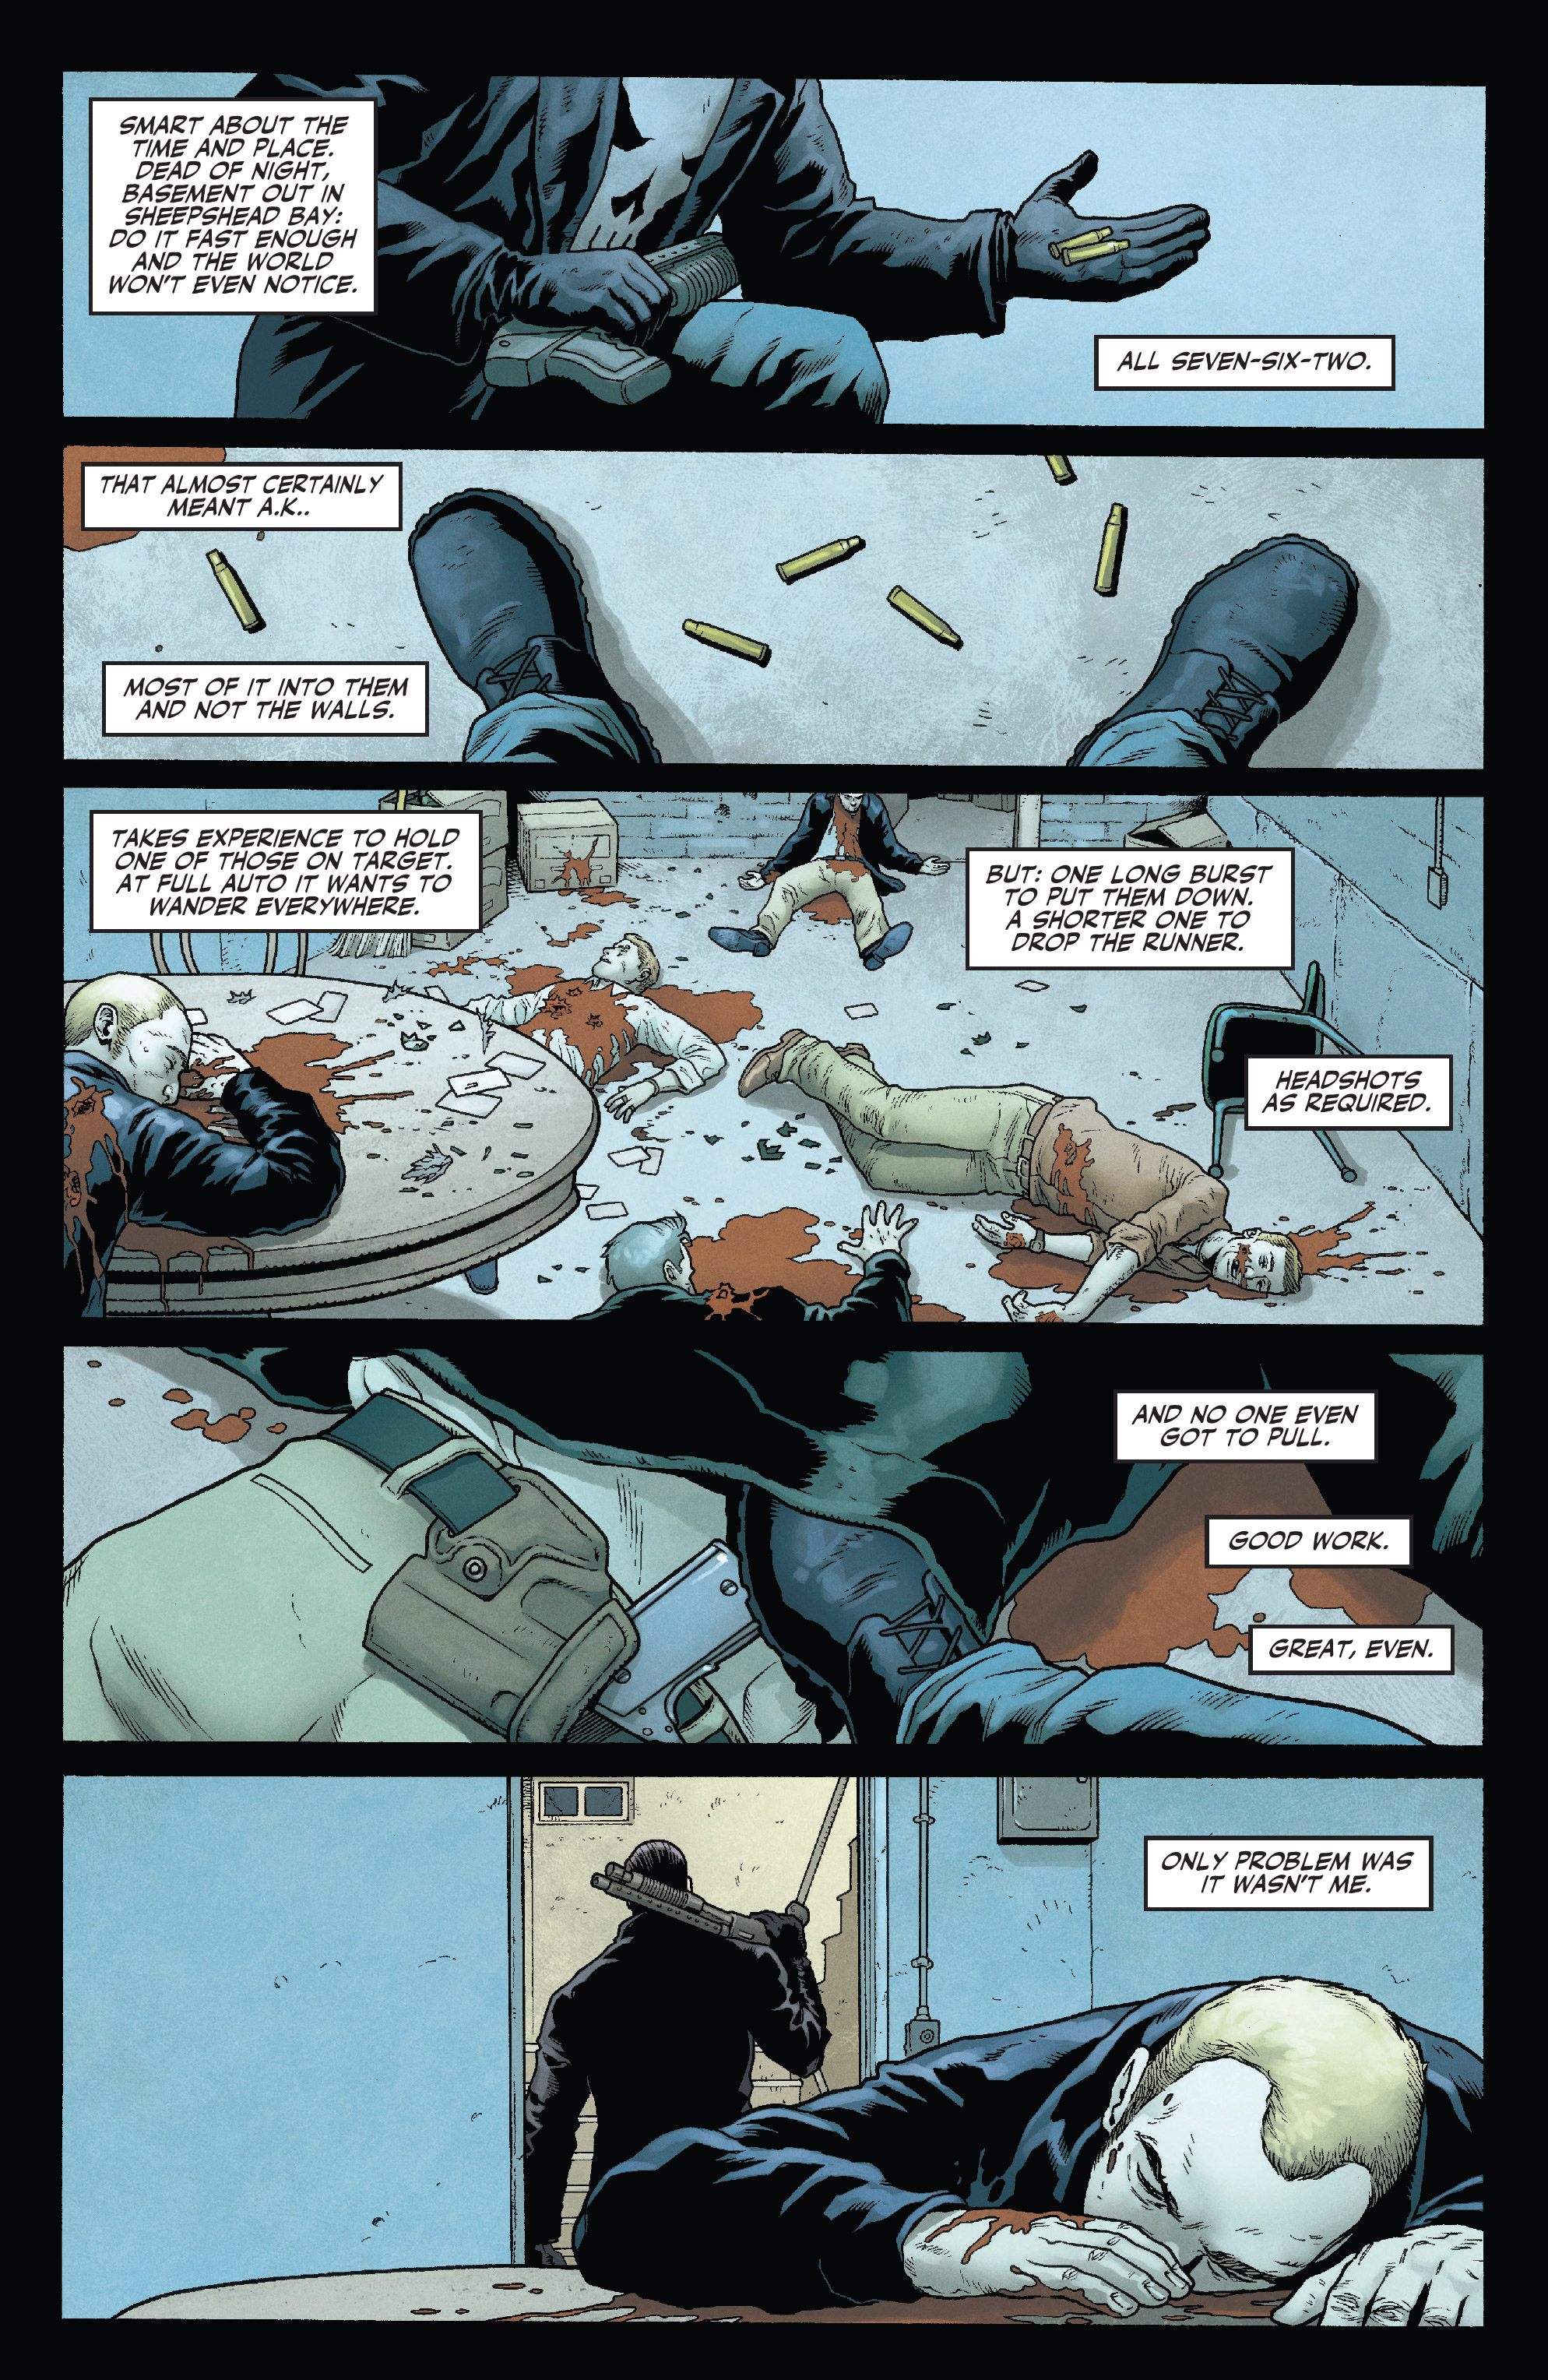 Punisher: Soviet (2019-): Chapter 1 - Page 4